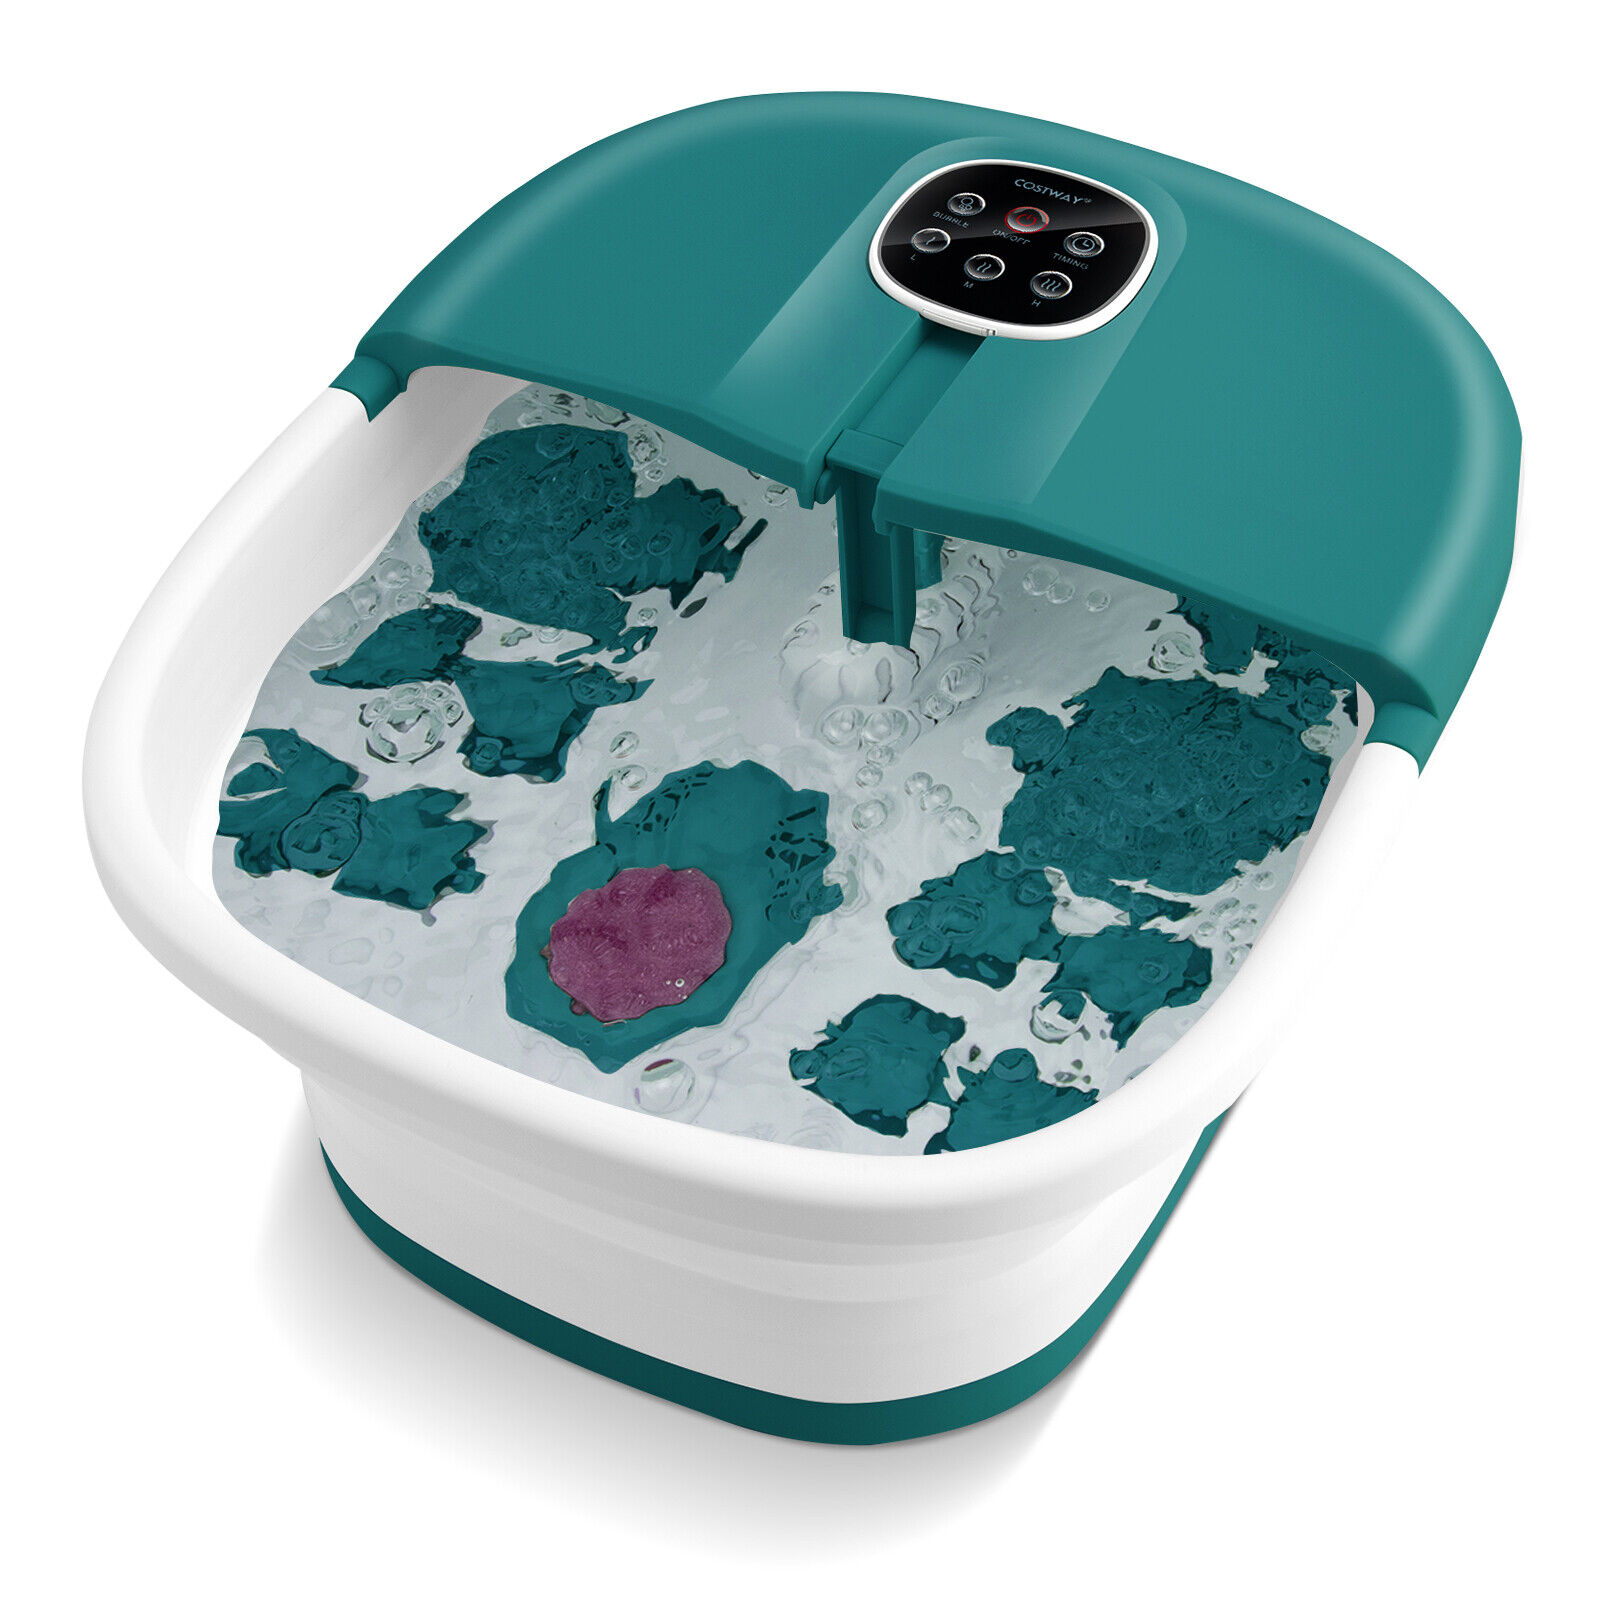 Foot Spa Bath Massager with Heat Bubbles and Remote Control-Teal Blue